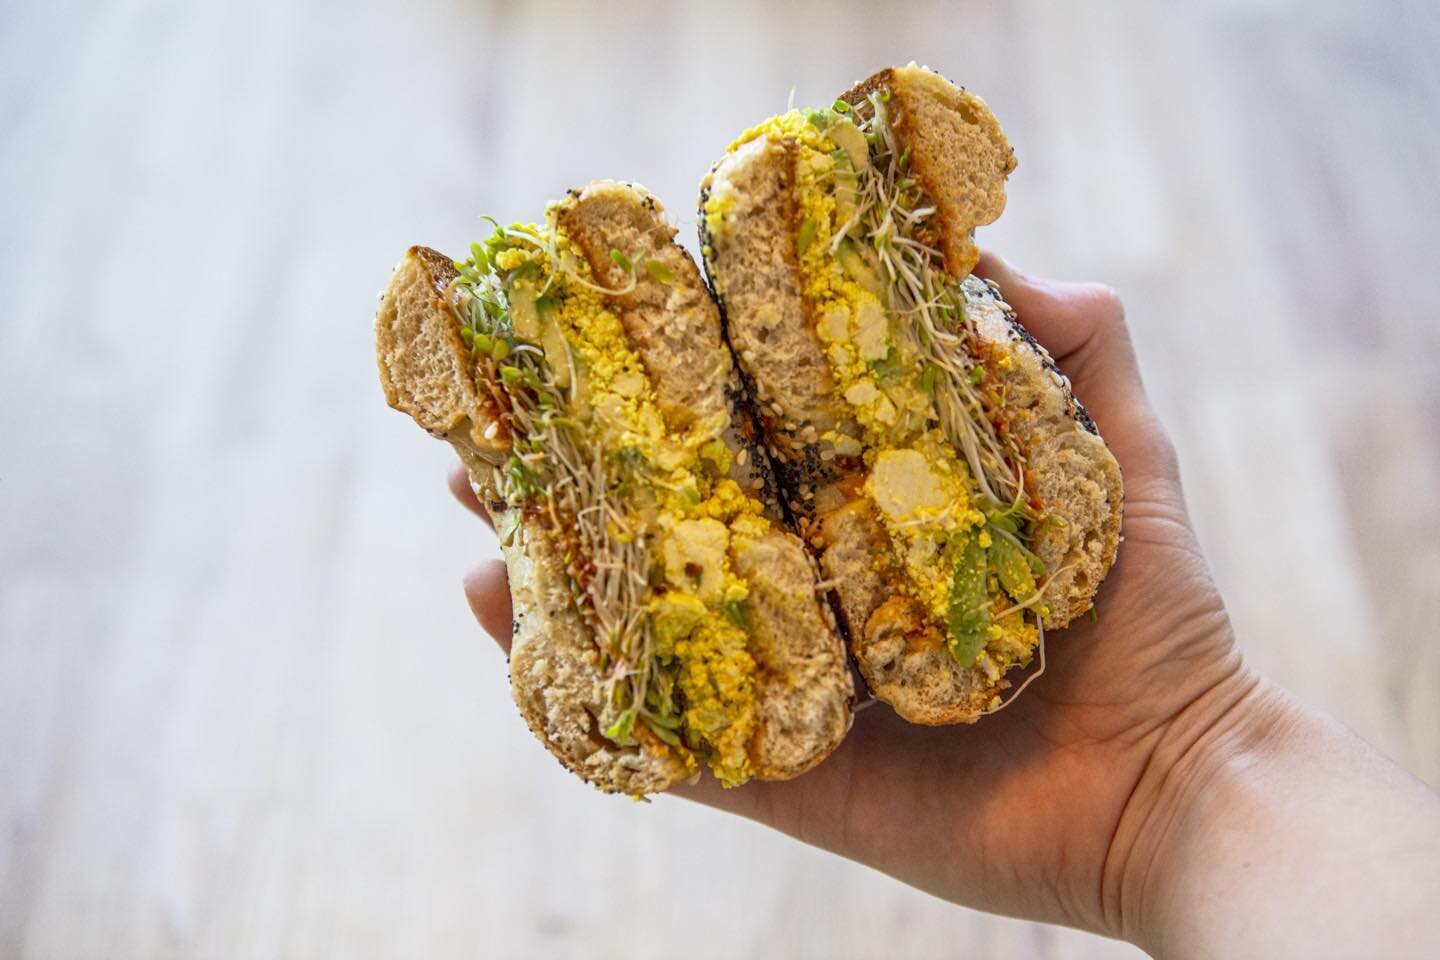 All about the Santi Bagel: Tofu egg, peanut butter, avocado, sriracha, sprouts on a toasted everything bagel. Hits the spot every time.